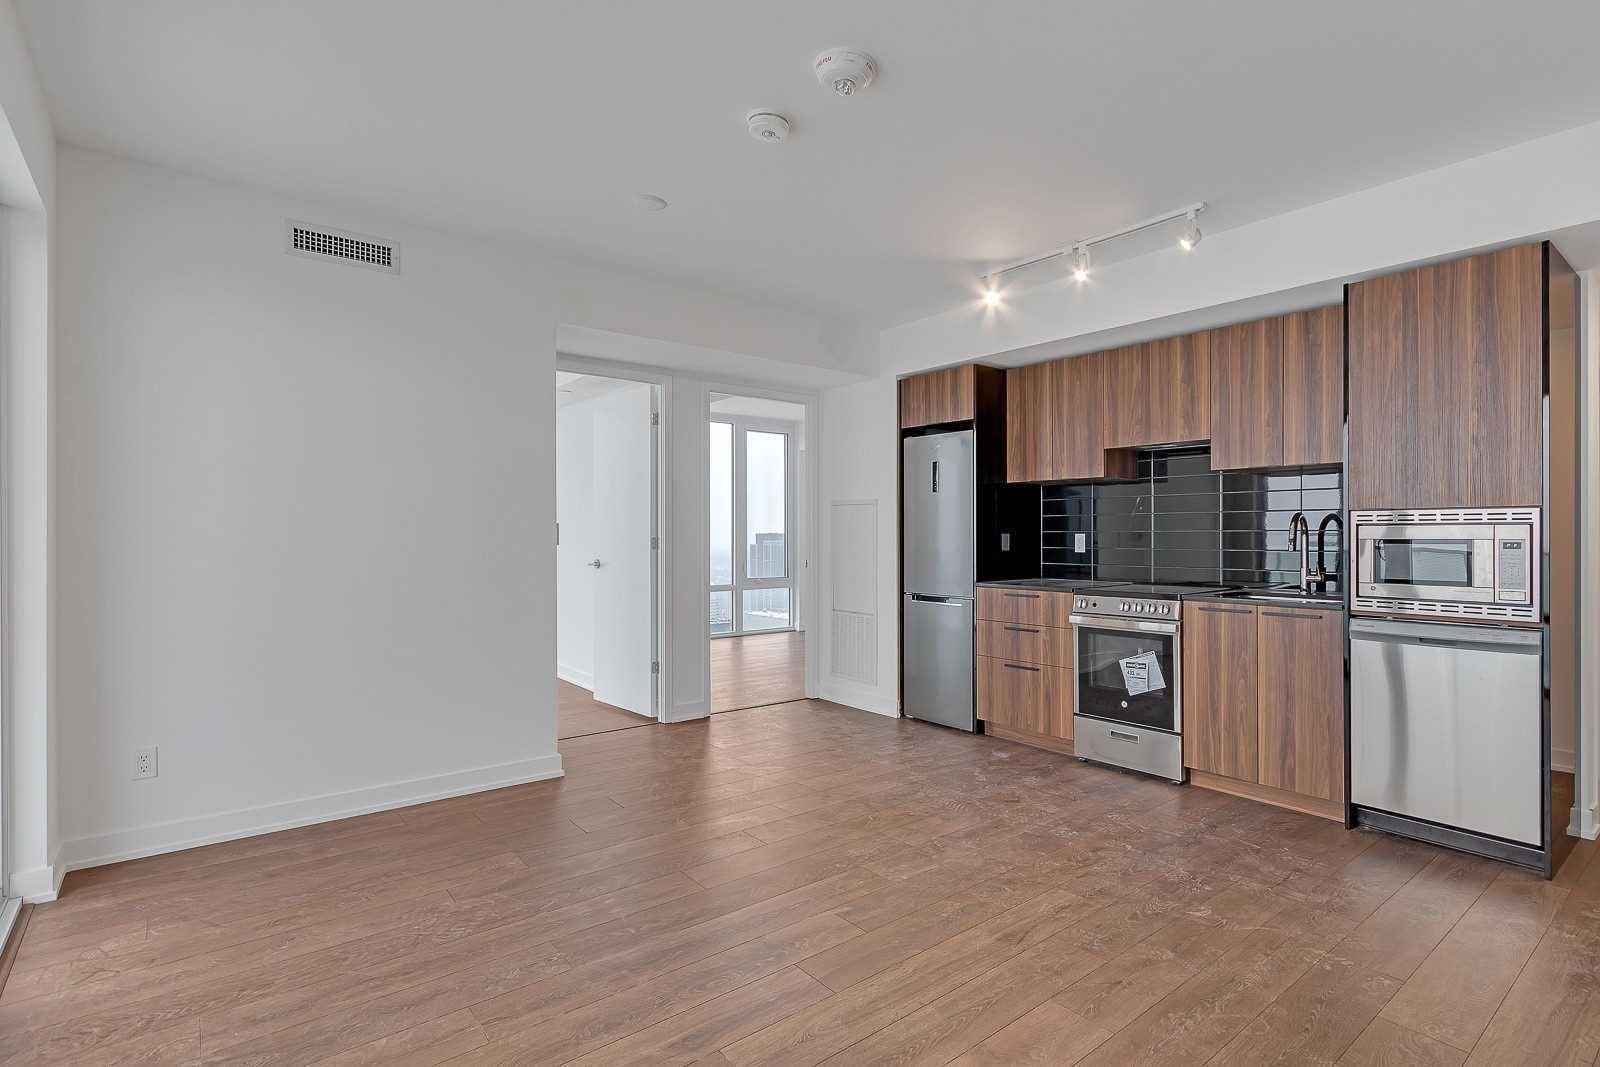 501 Yonge St, unit 4802 for rent in The Village - image #2